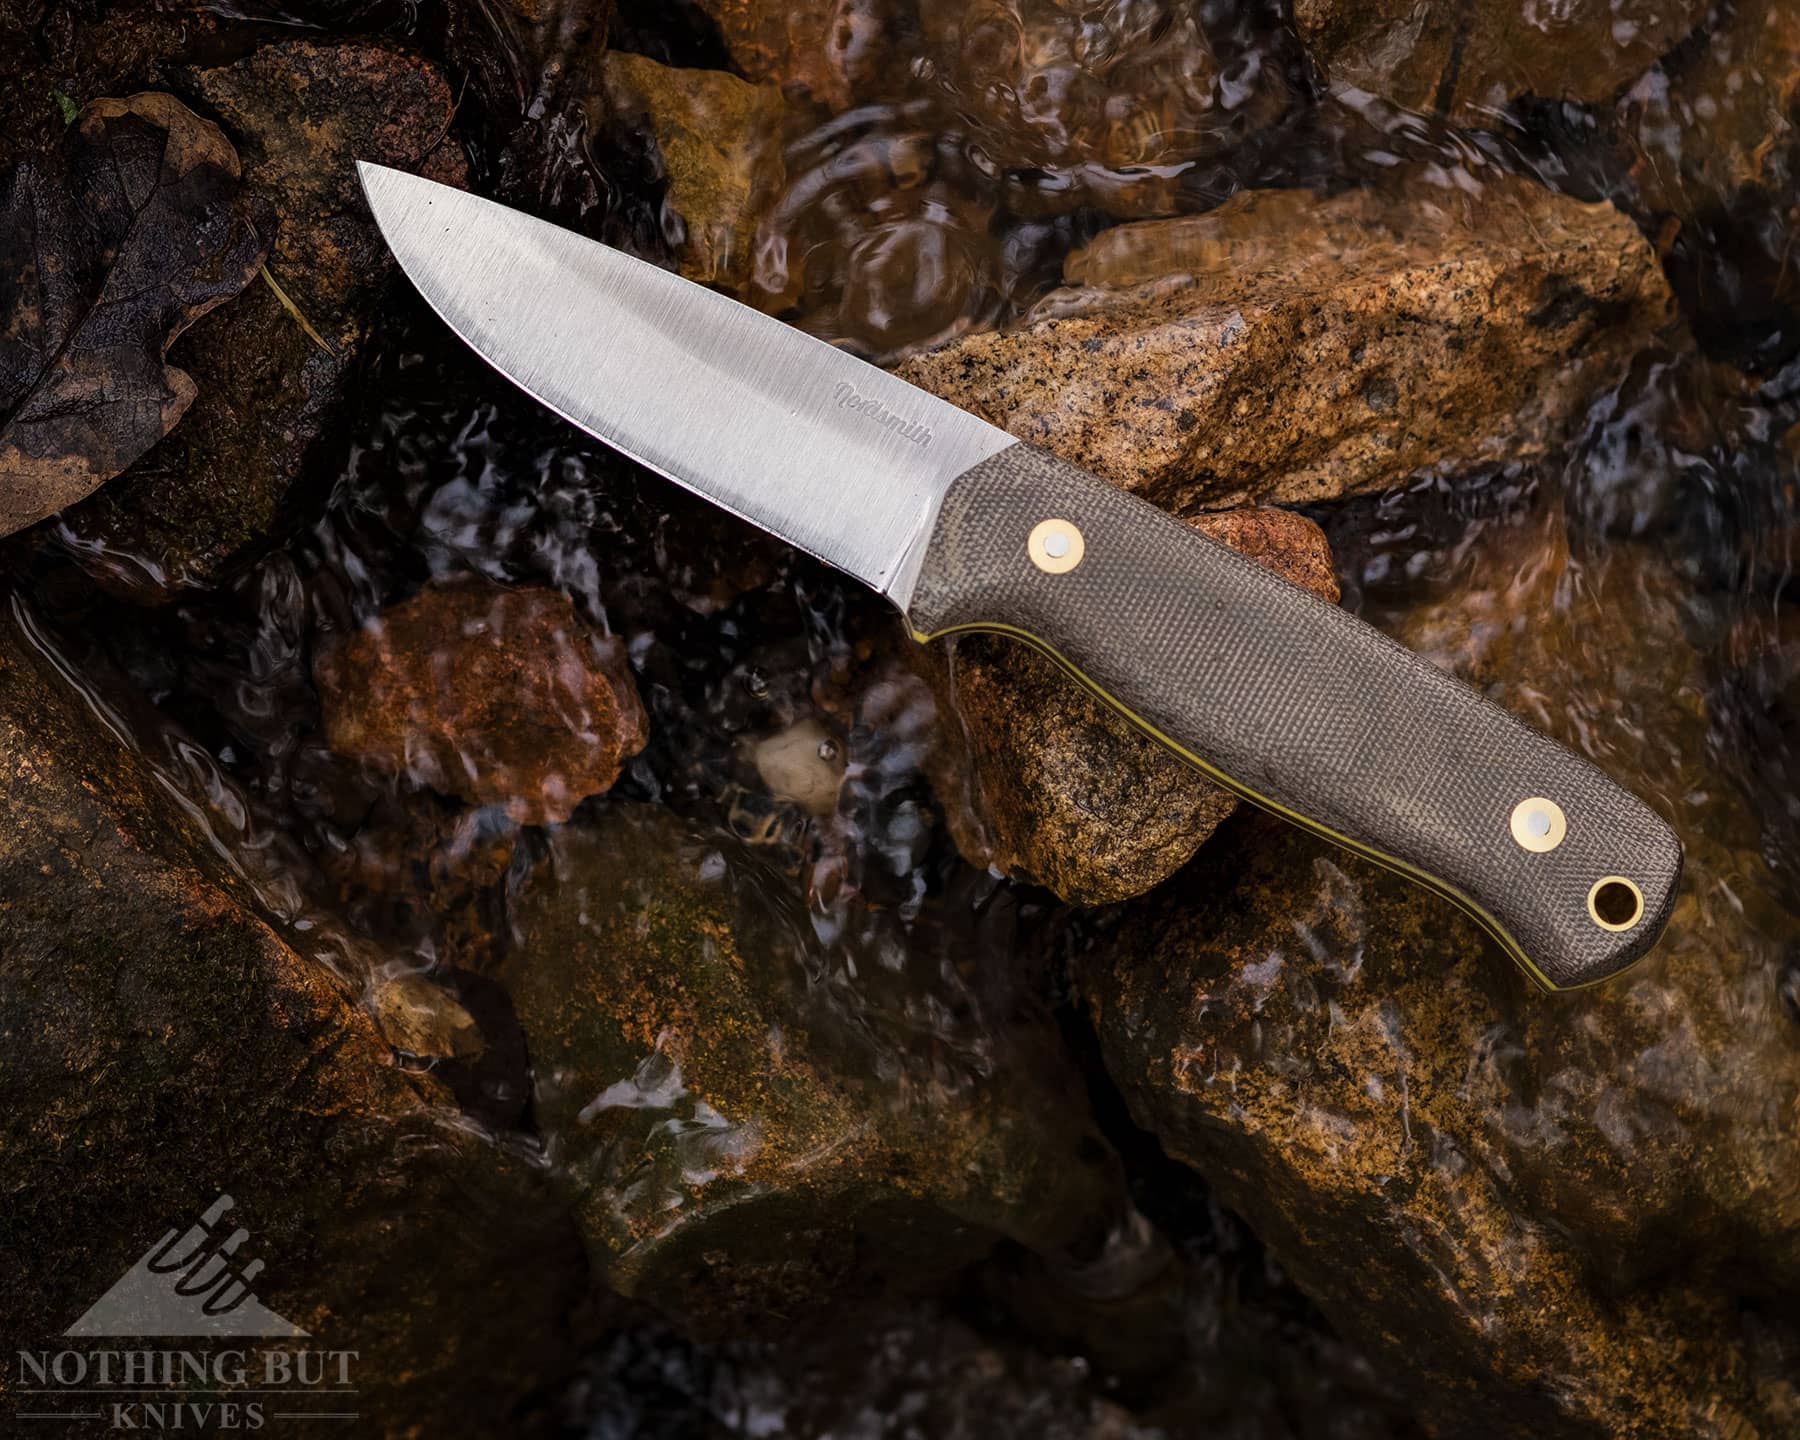 The Nordsmith Pilgrim LT has a Micarta handle and an AEB-L steel blade.